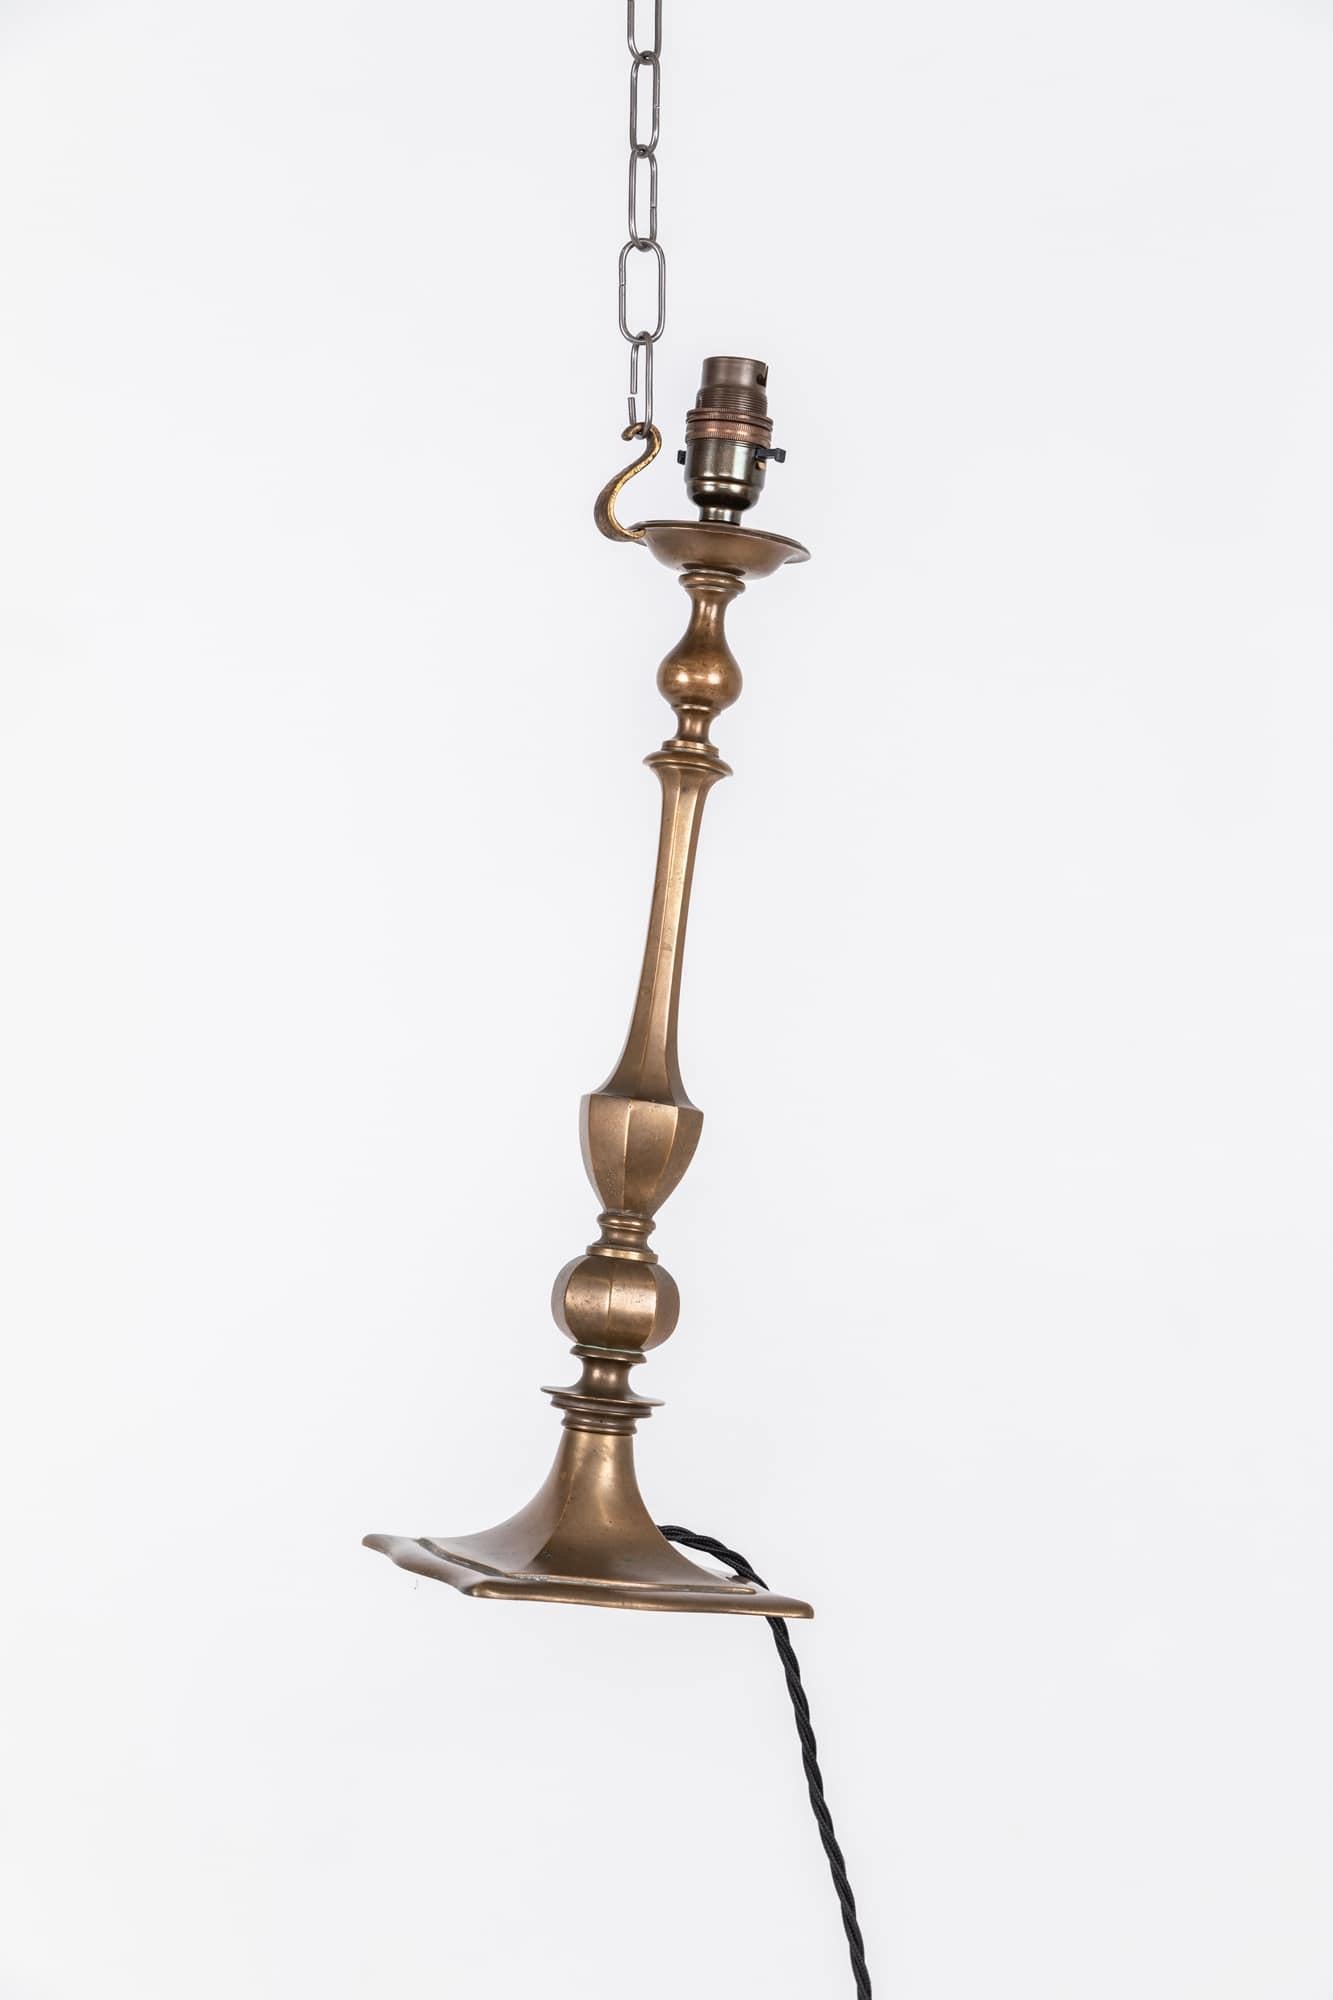 A very attractive Edwardian brass table lamp. c.1910

Of high quality, heavy brass construction with beautiful aged patina.

Rewired with 2m of black twisted flex and BS 3-pin plug.
